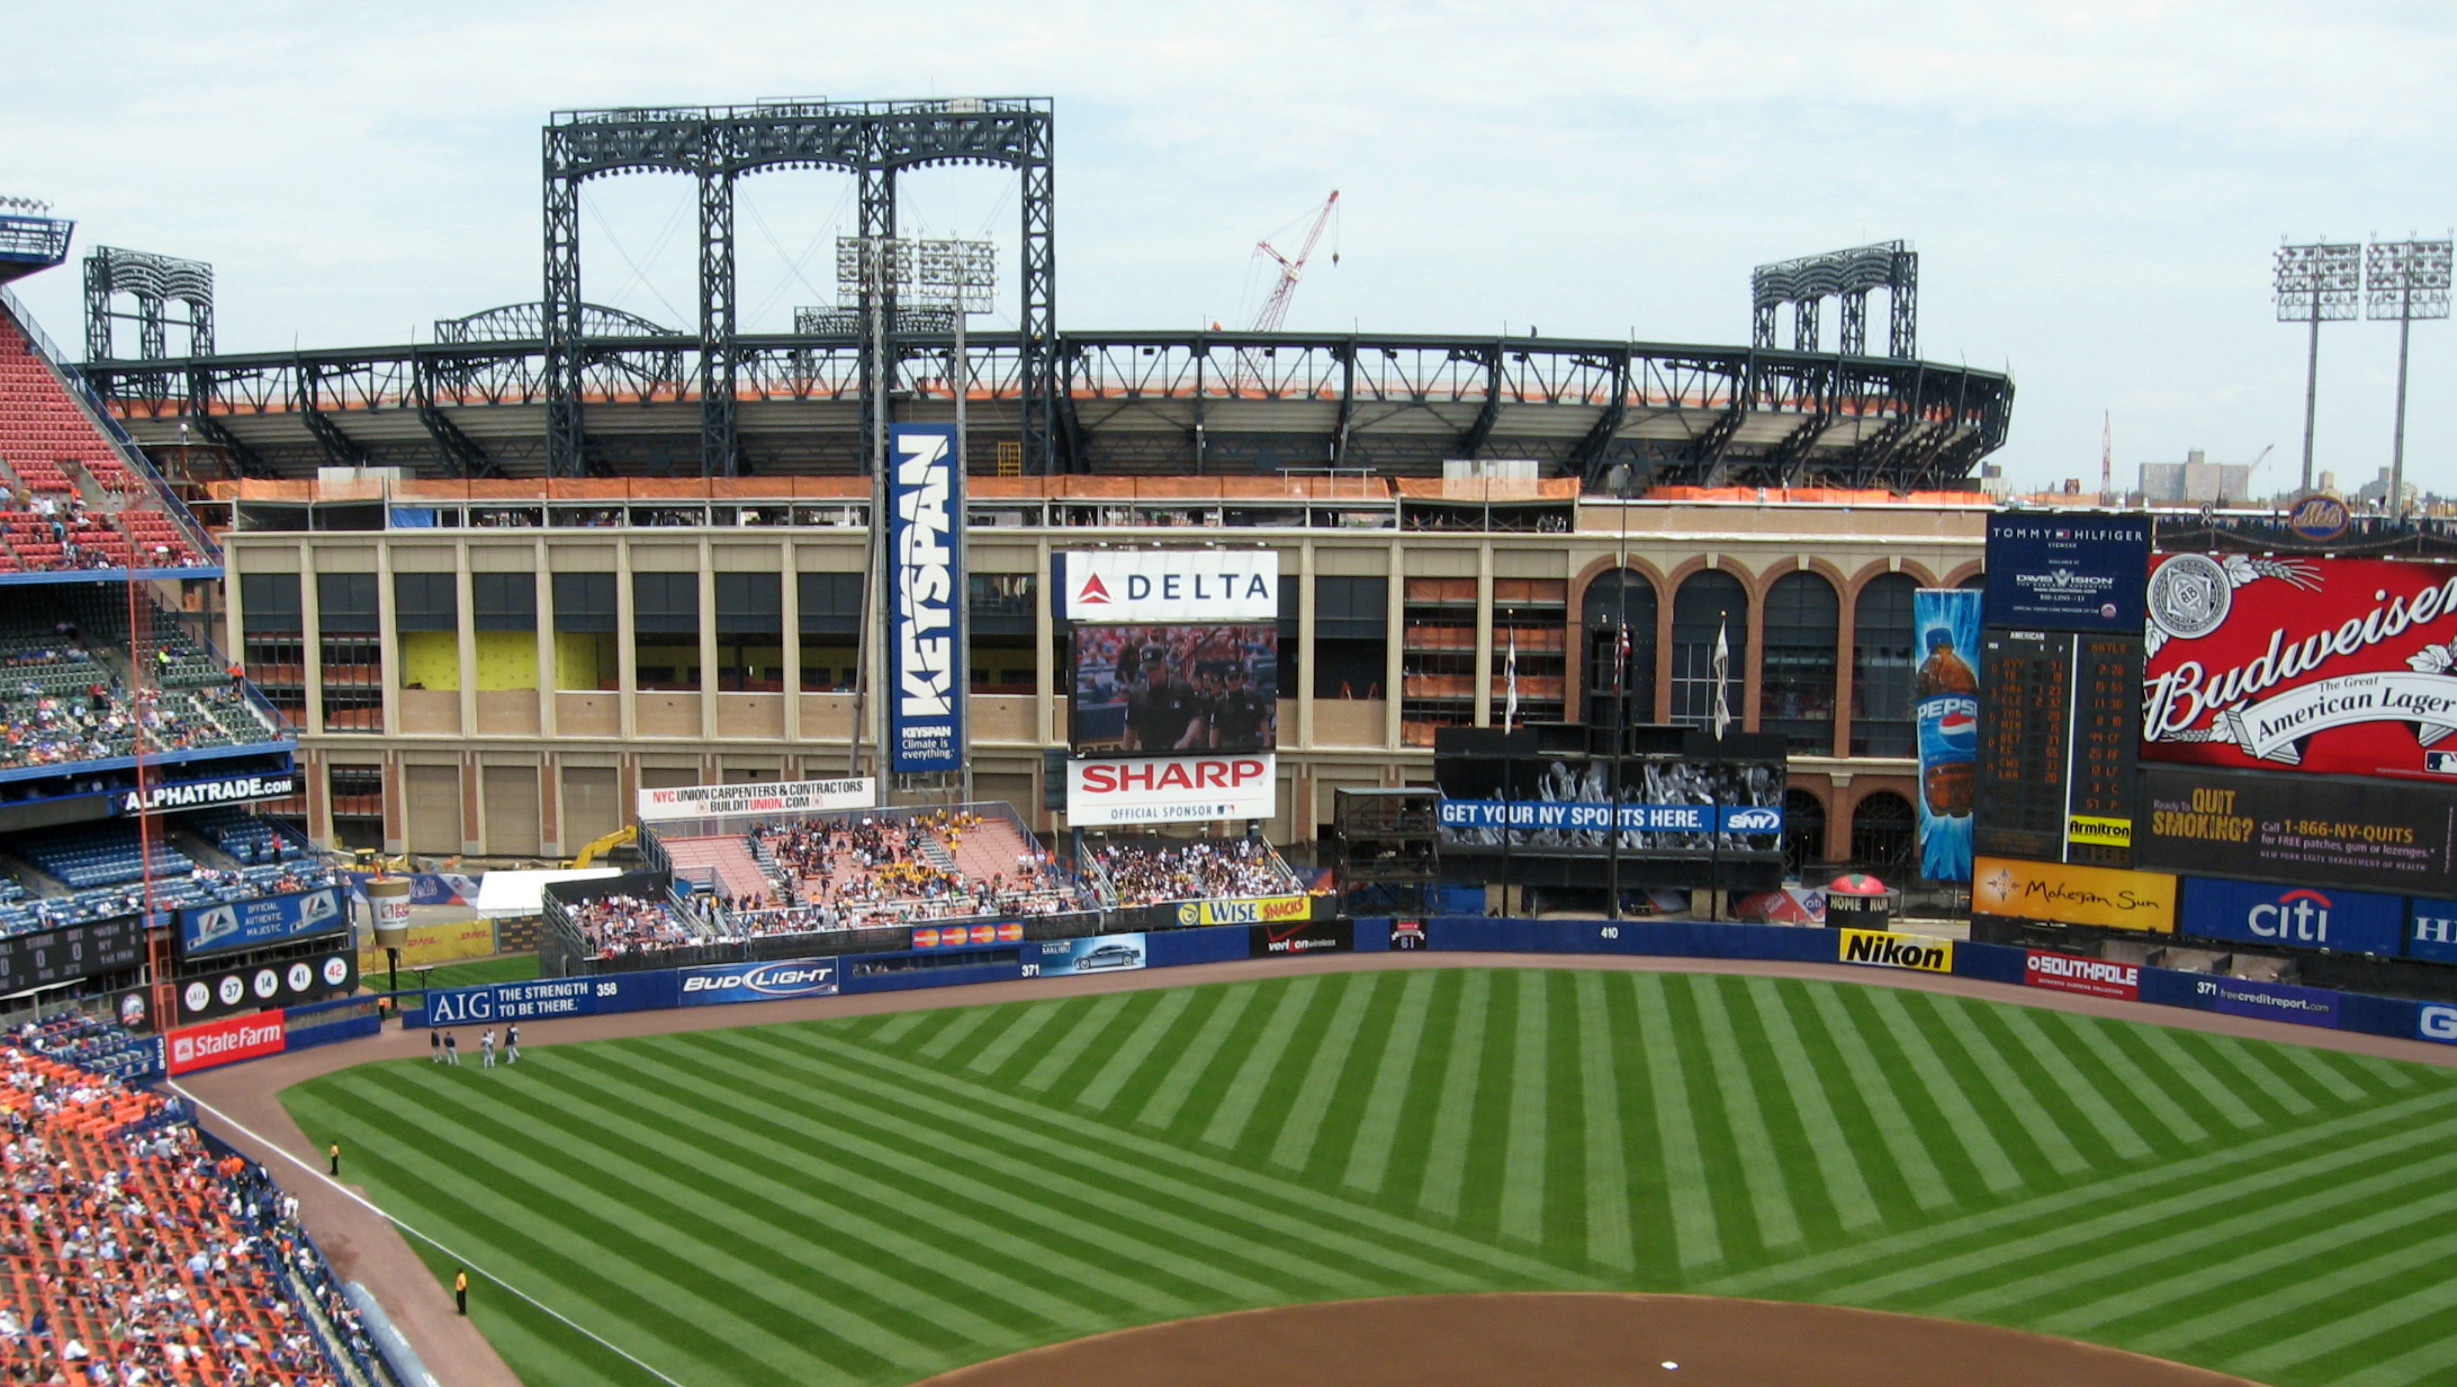 Shea Stadium and Citifield in the background